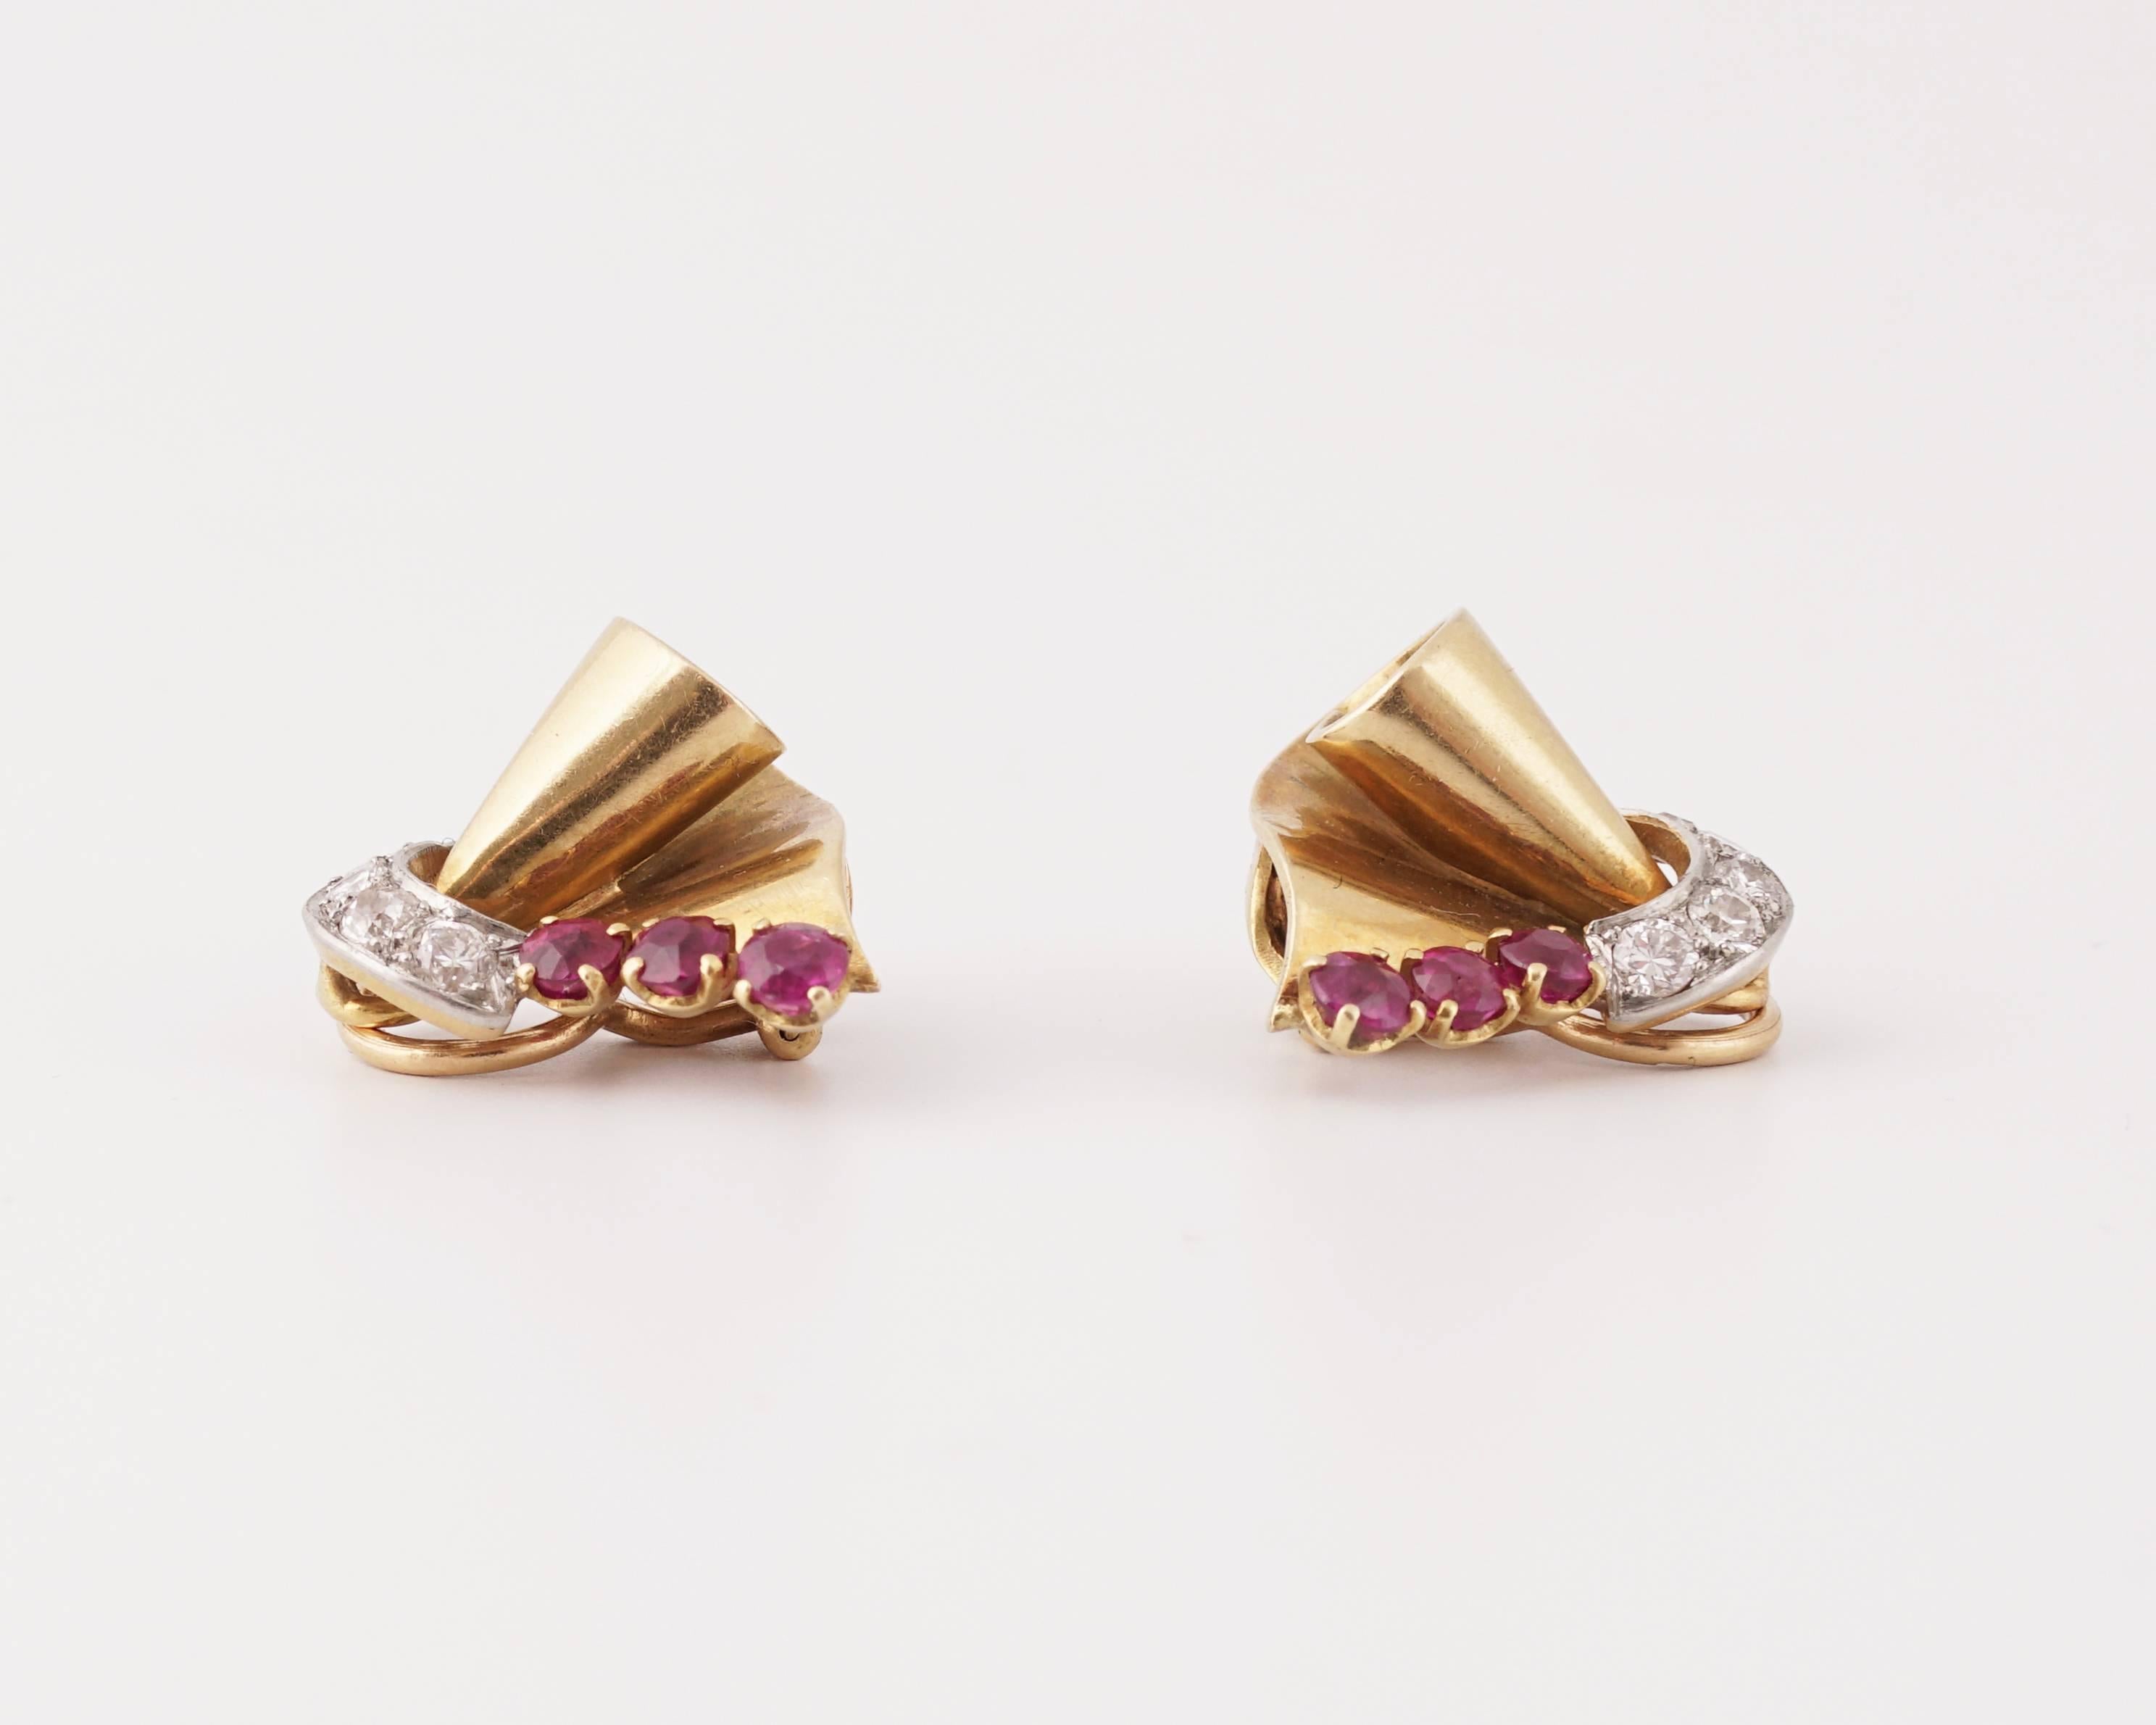 Beautiful Retro Clip Earrings, from the early 1940's.
The Earrings, of characteristic but modern design of the period, are made of 18k Gold, Round Brillant-Cut diamonds (approx. 0,45cts) and Rubies (approx. 0,60cts) on platinum set (eagle head and